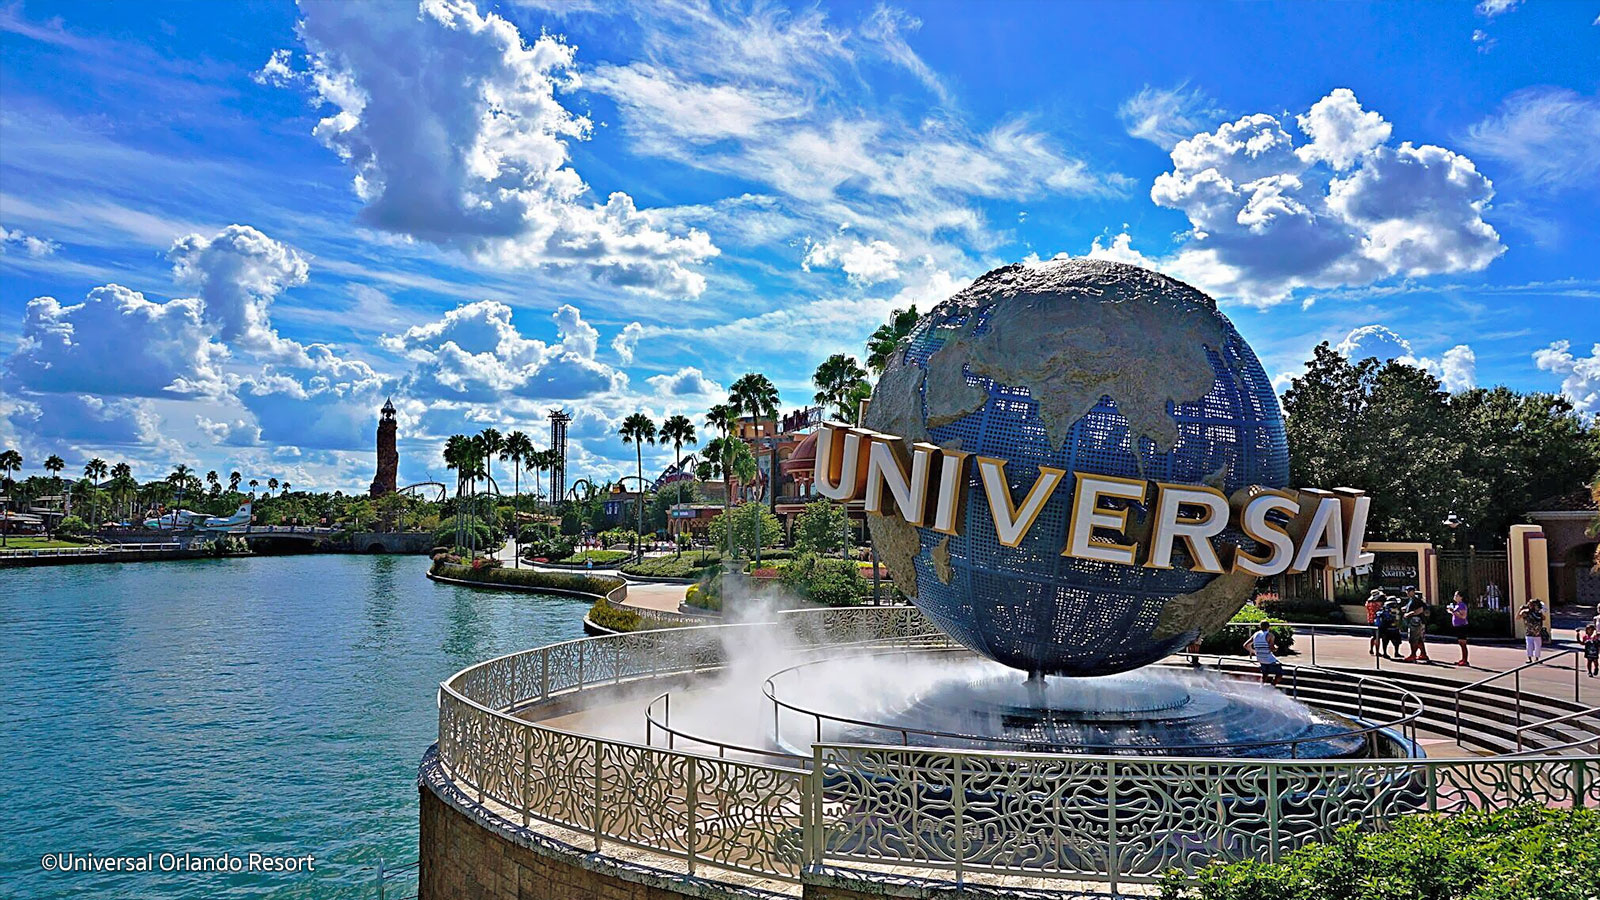 Universal Orlando Theme Park Set For Public Reopening June 5th!